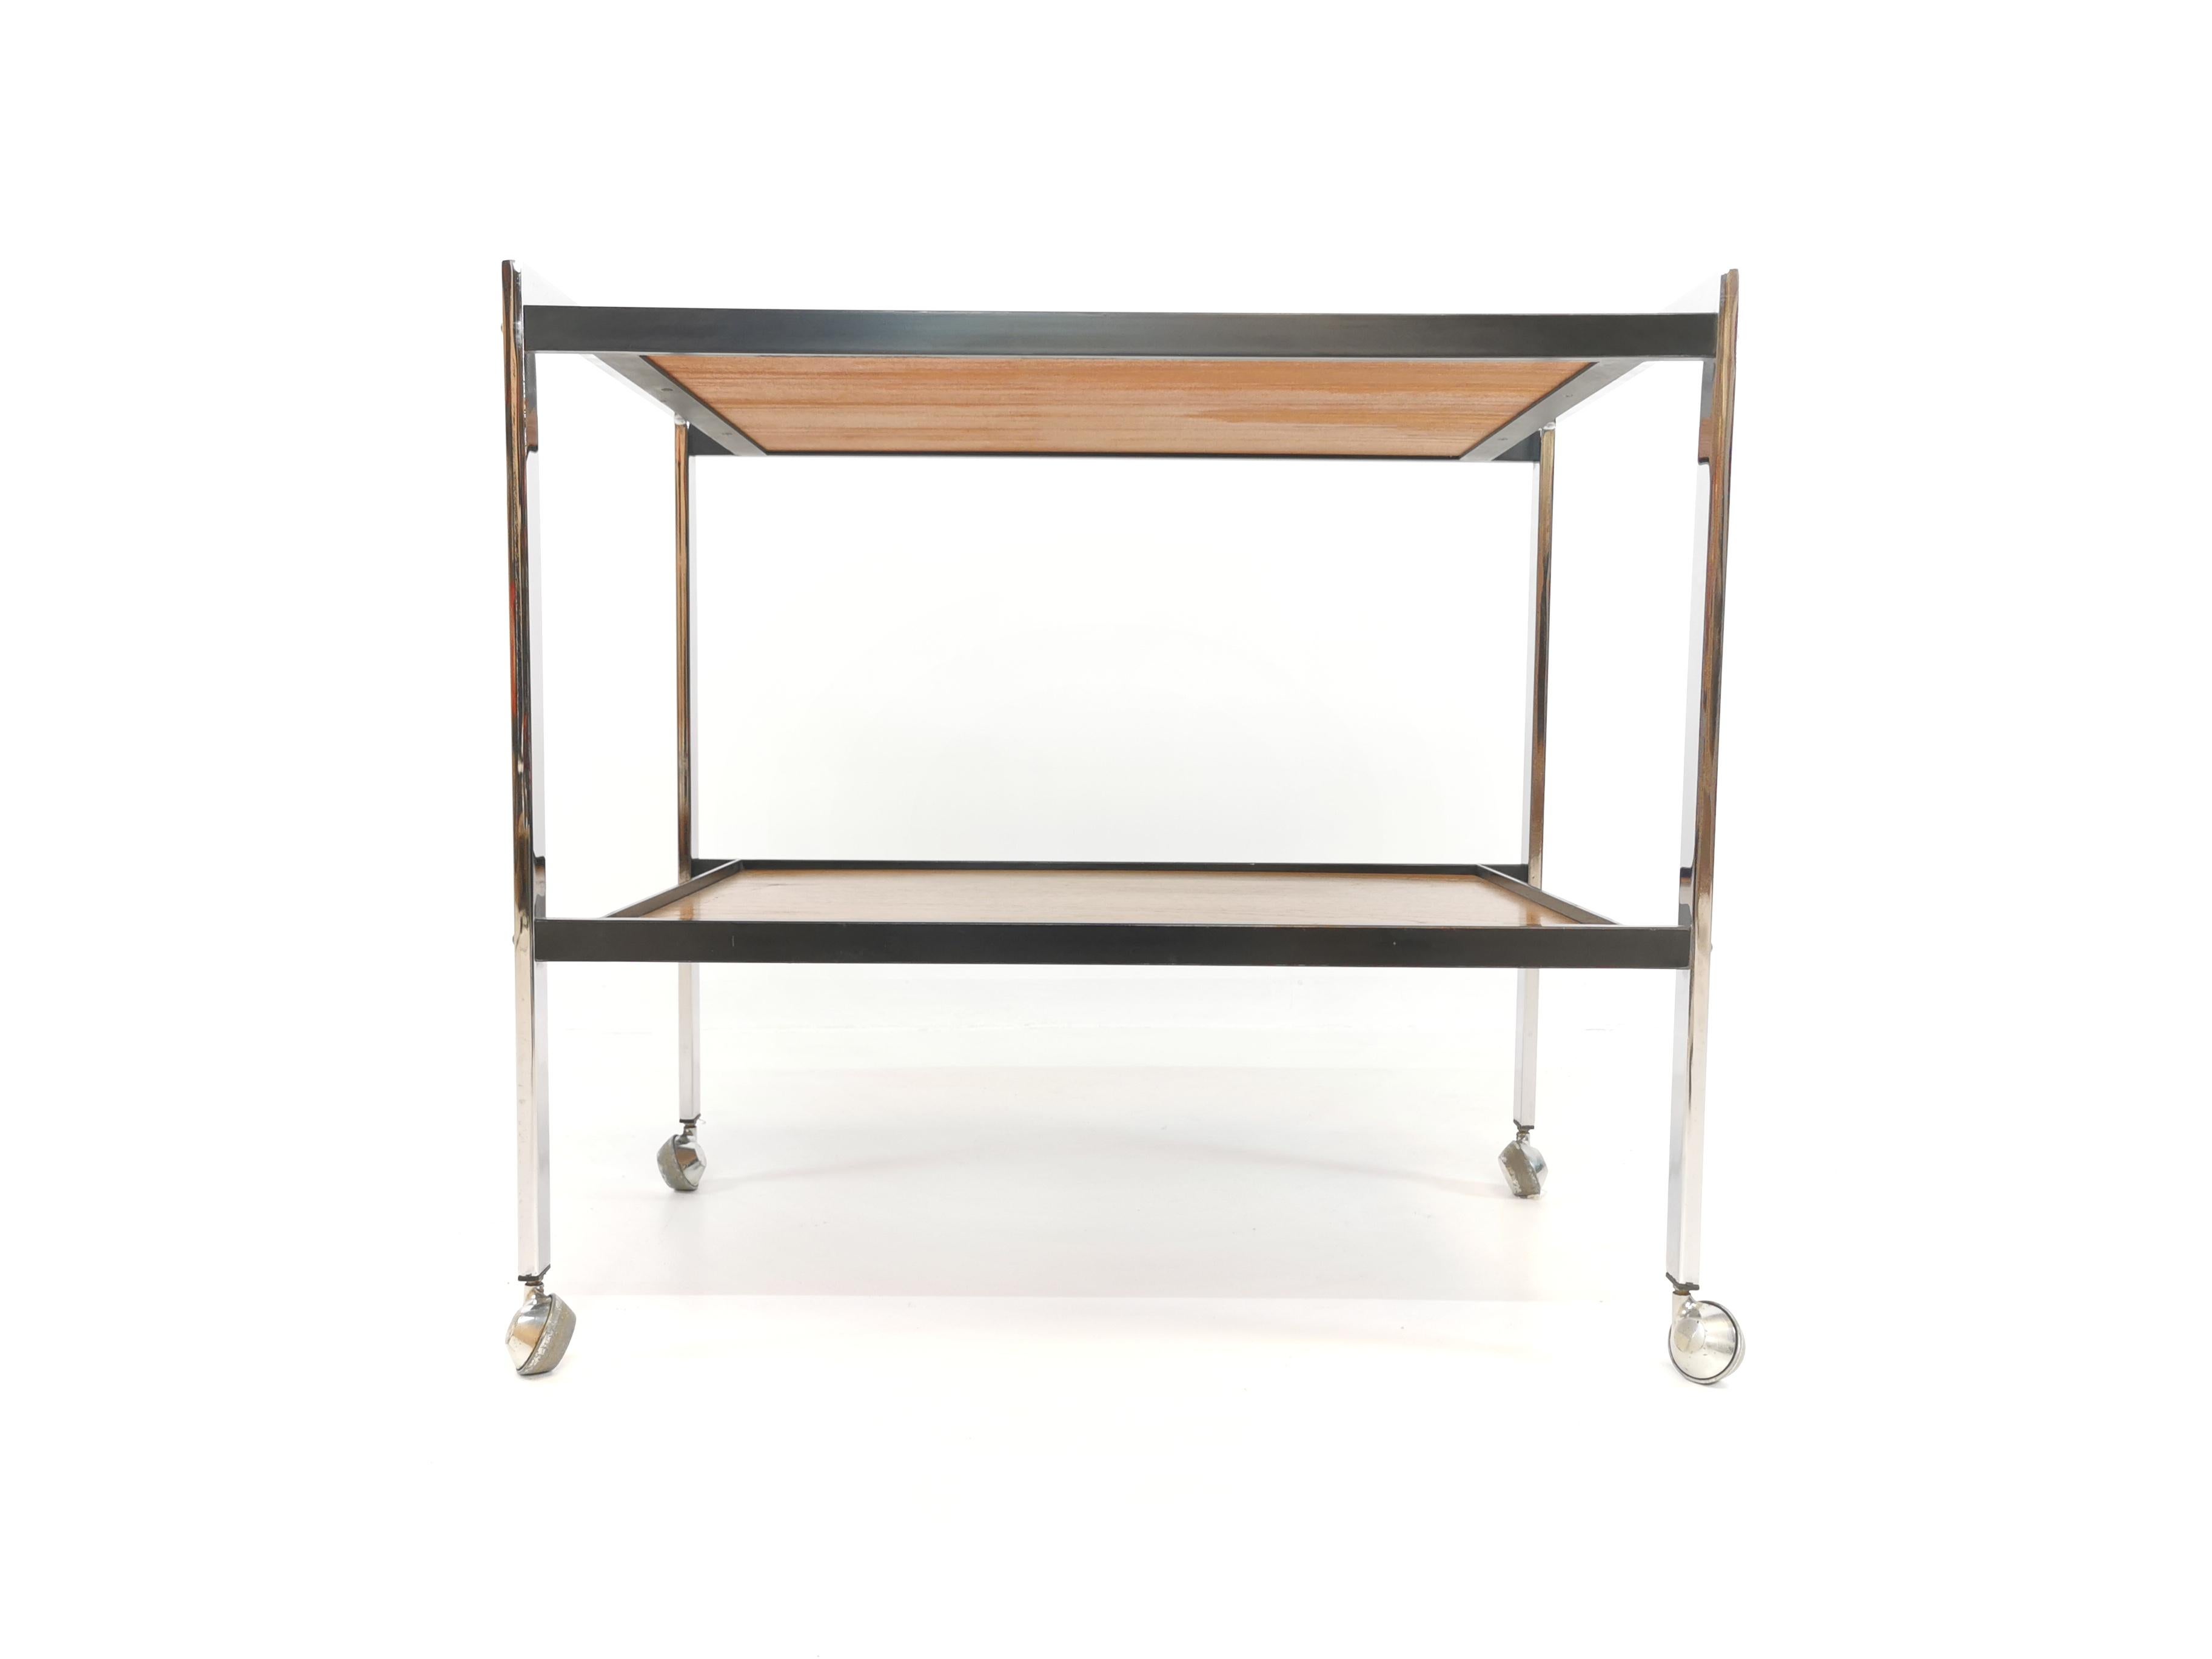 A drinks trolley by Howard Miller. A superb piece of 1970s high-end design. 

Chrome frame and beautifully grained teak tiers. Sat on metal casters.